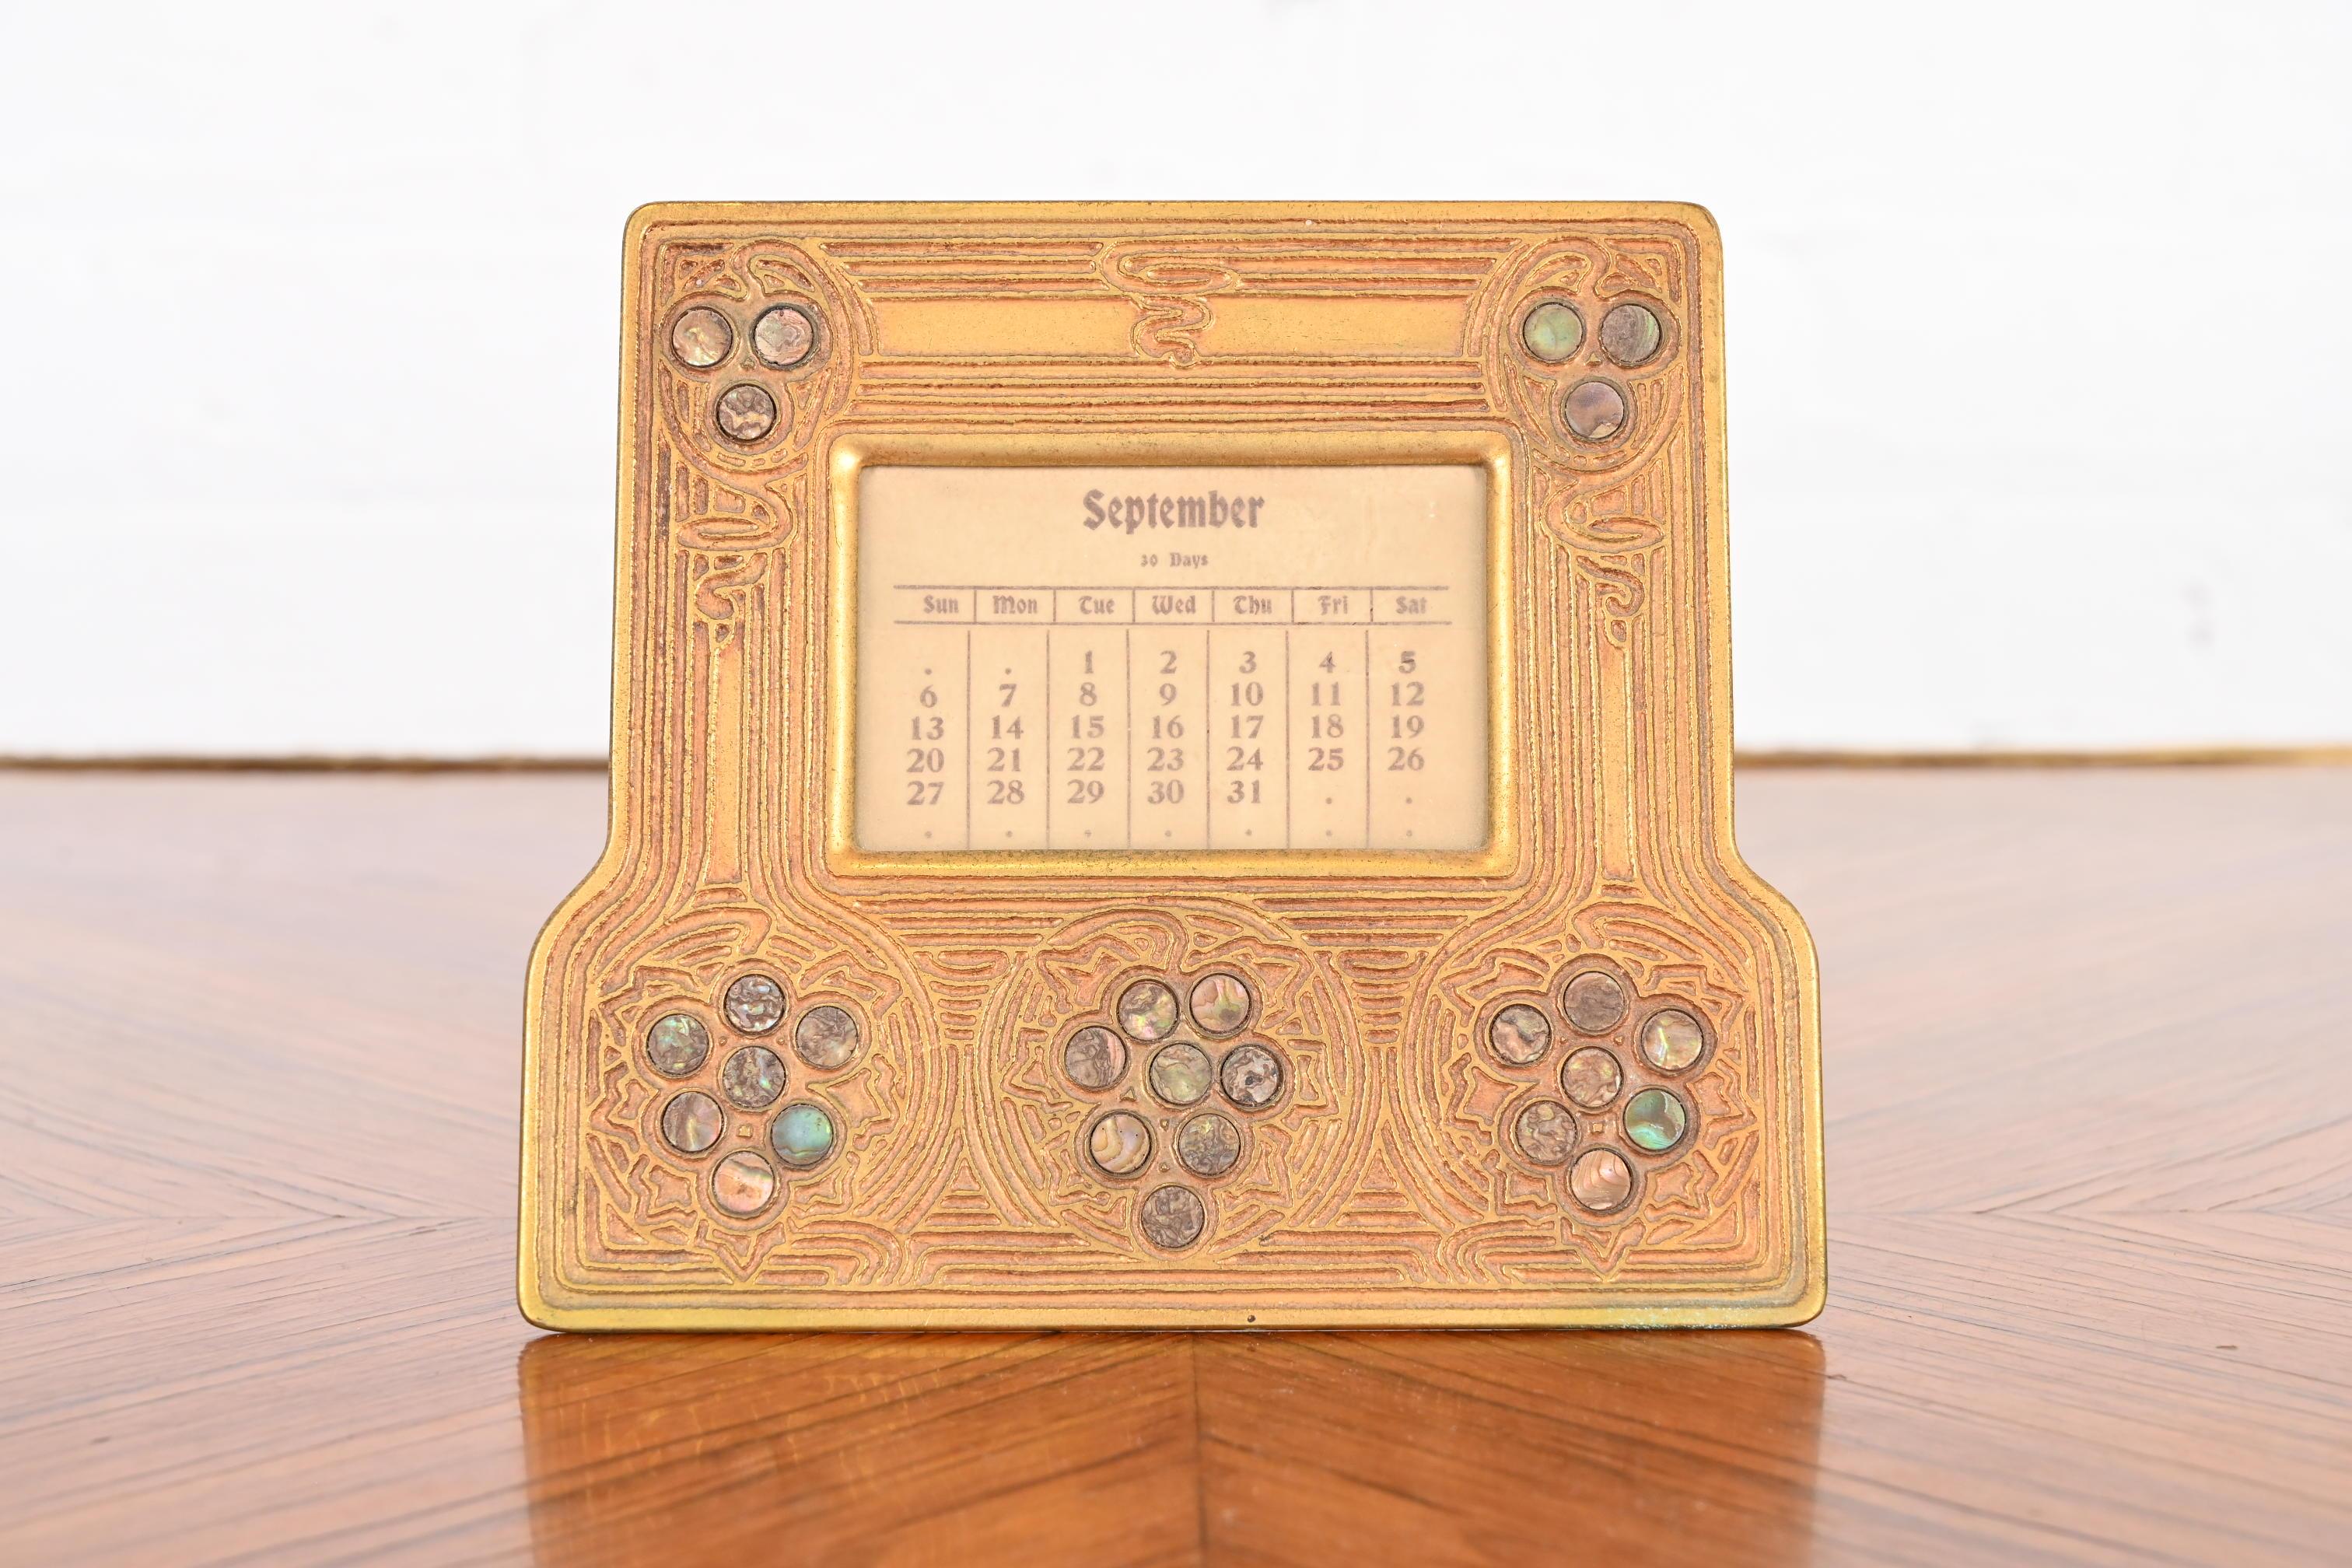 A gorgeous Art Deco period bronze doré and inlaid abalone picture frame or calendar frame with original calendar inserts

By Tiffany Studios

New York, USA, early 20th century

Measures: 6.5